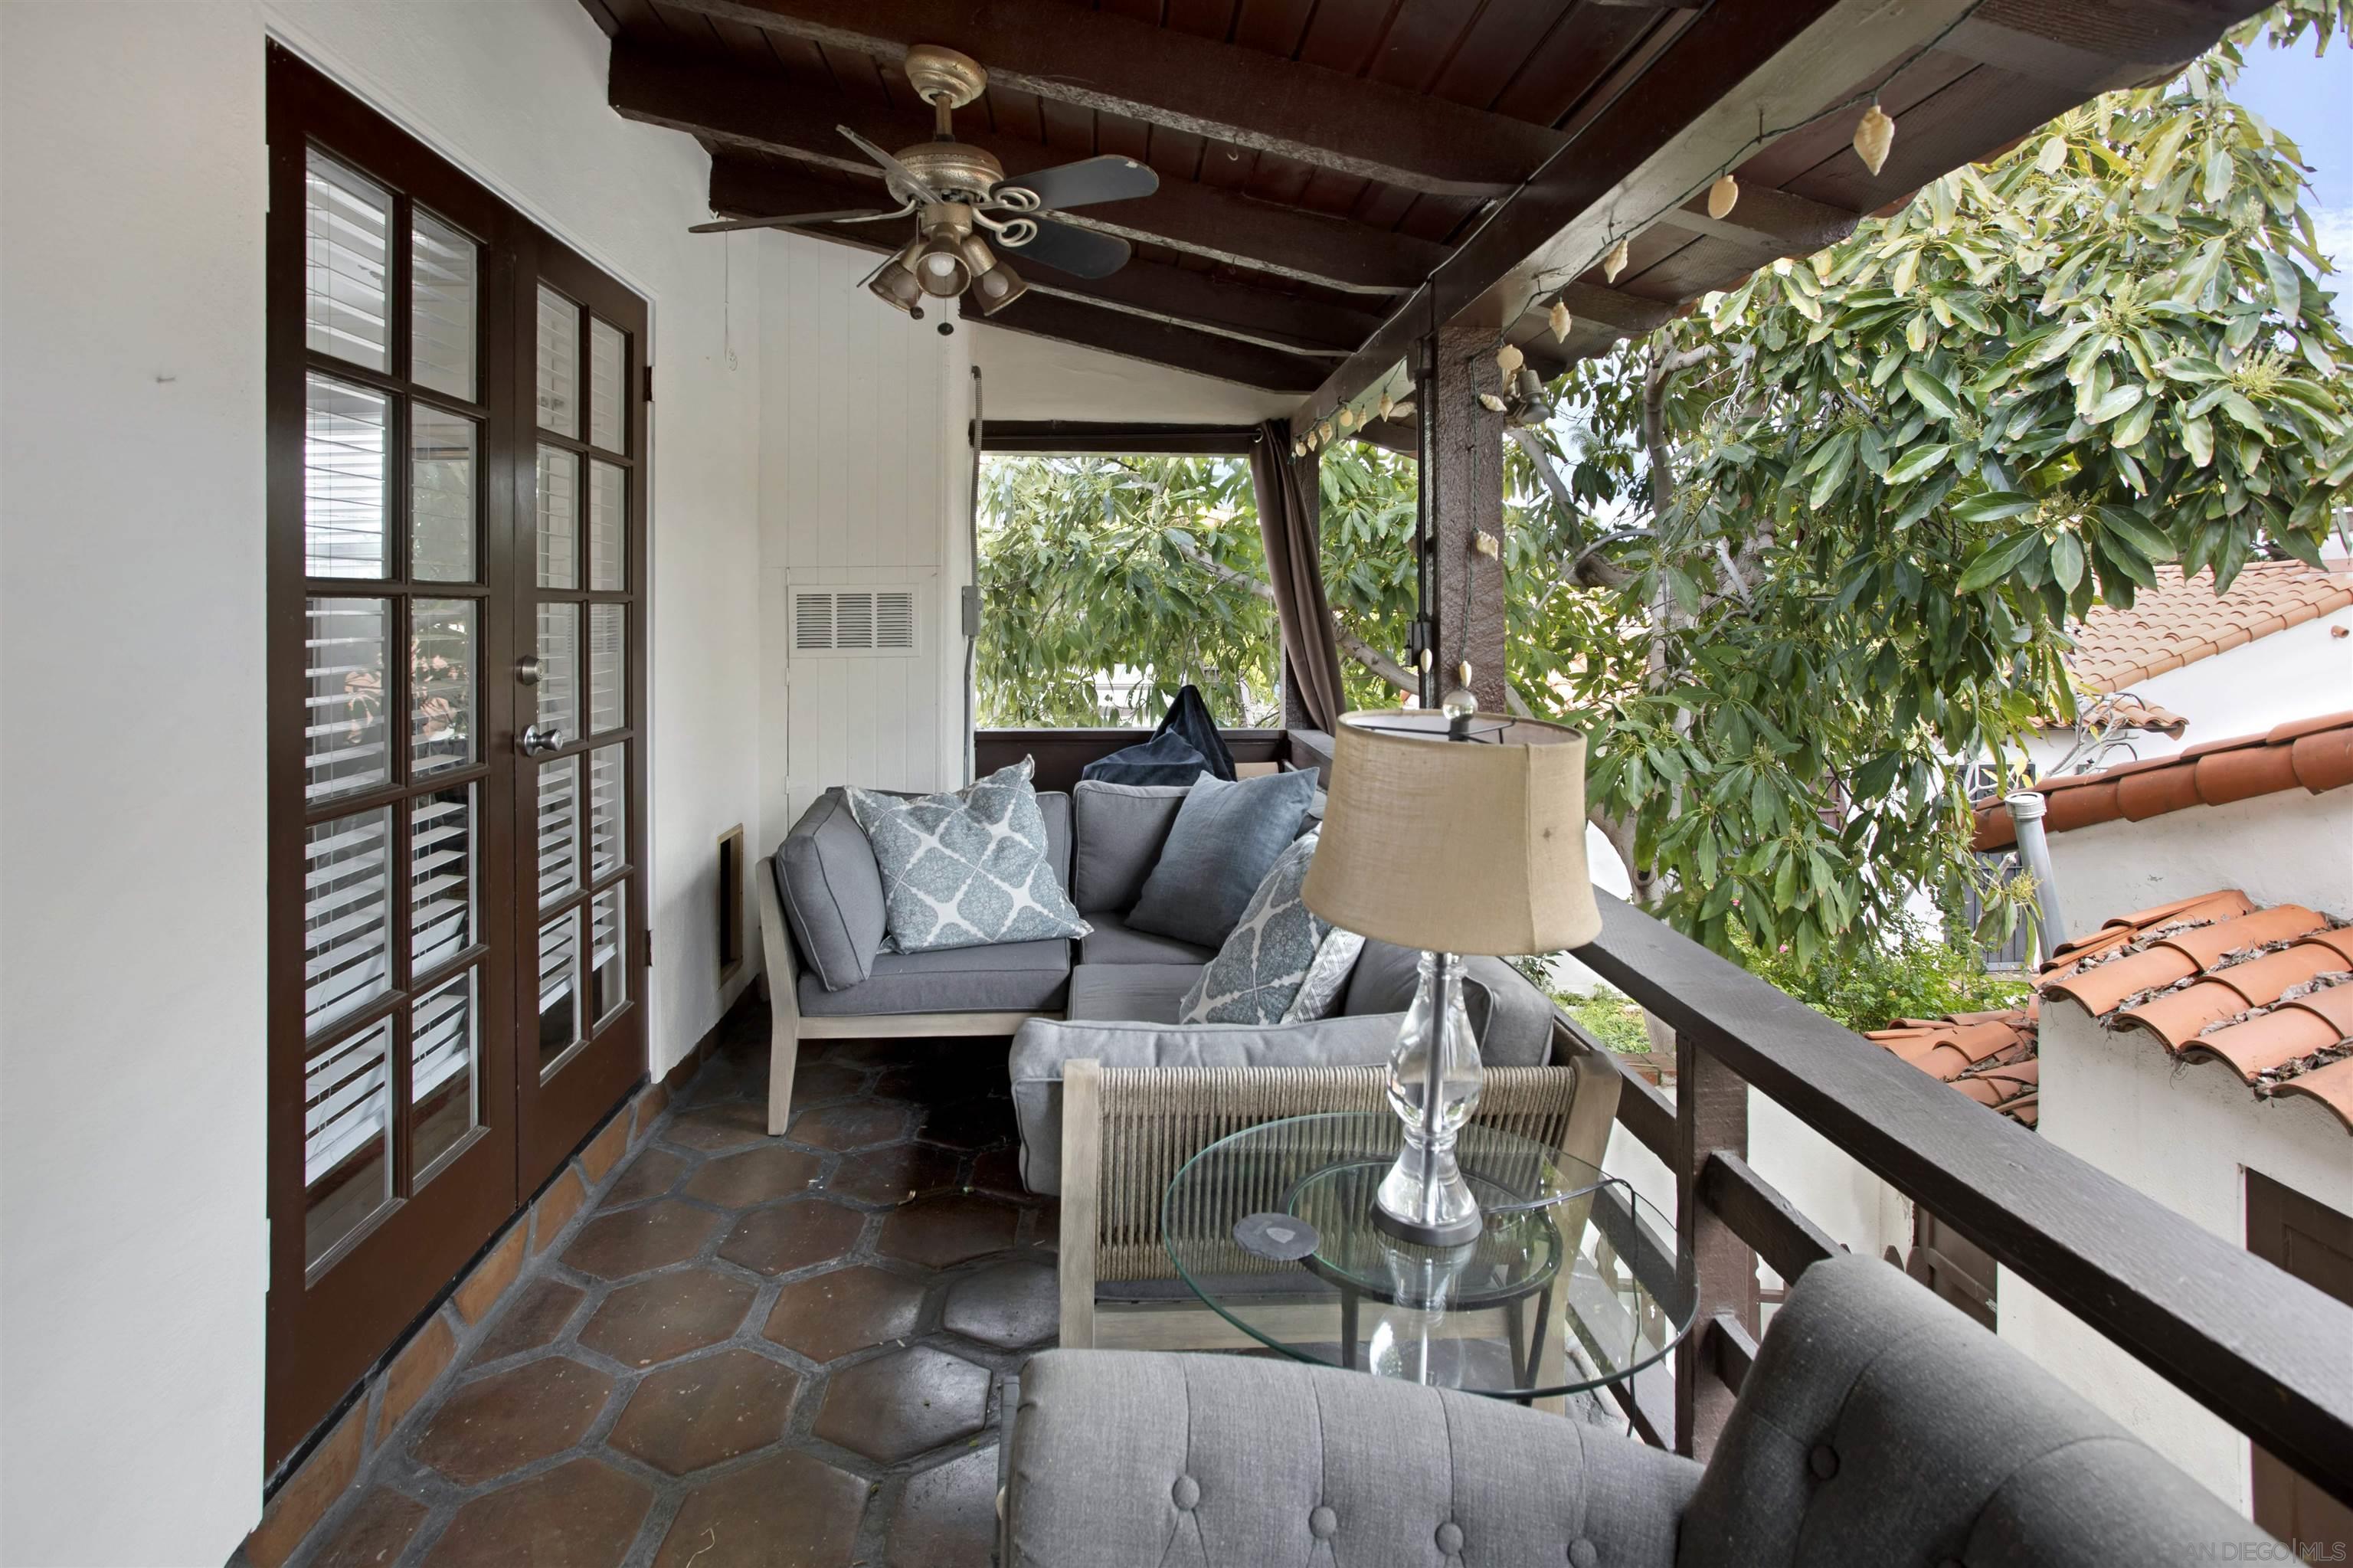 a view of balcony with couch and chairs